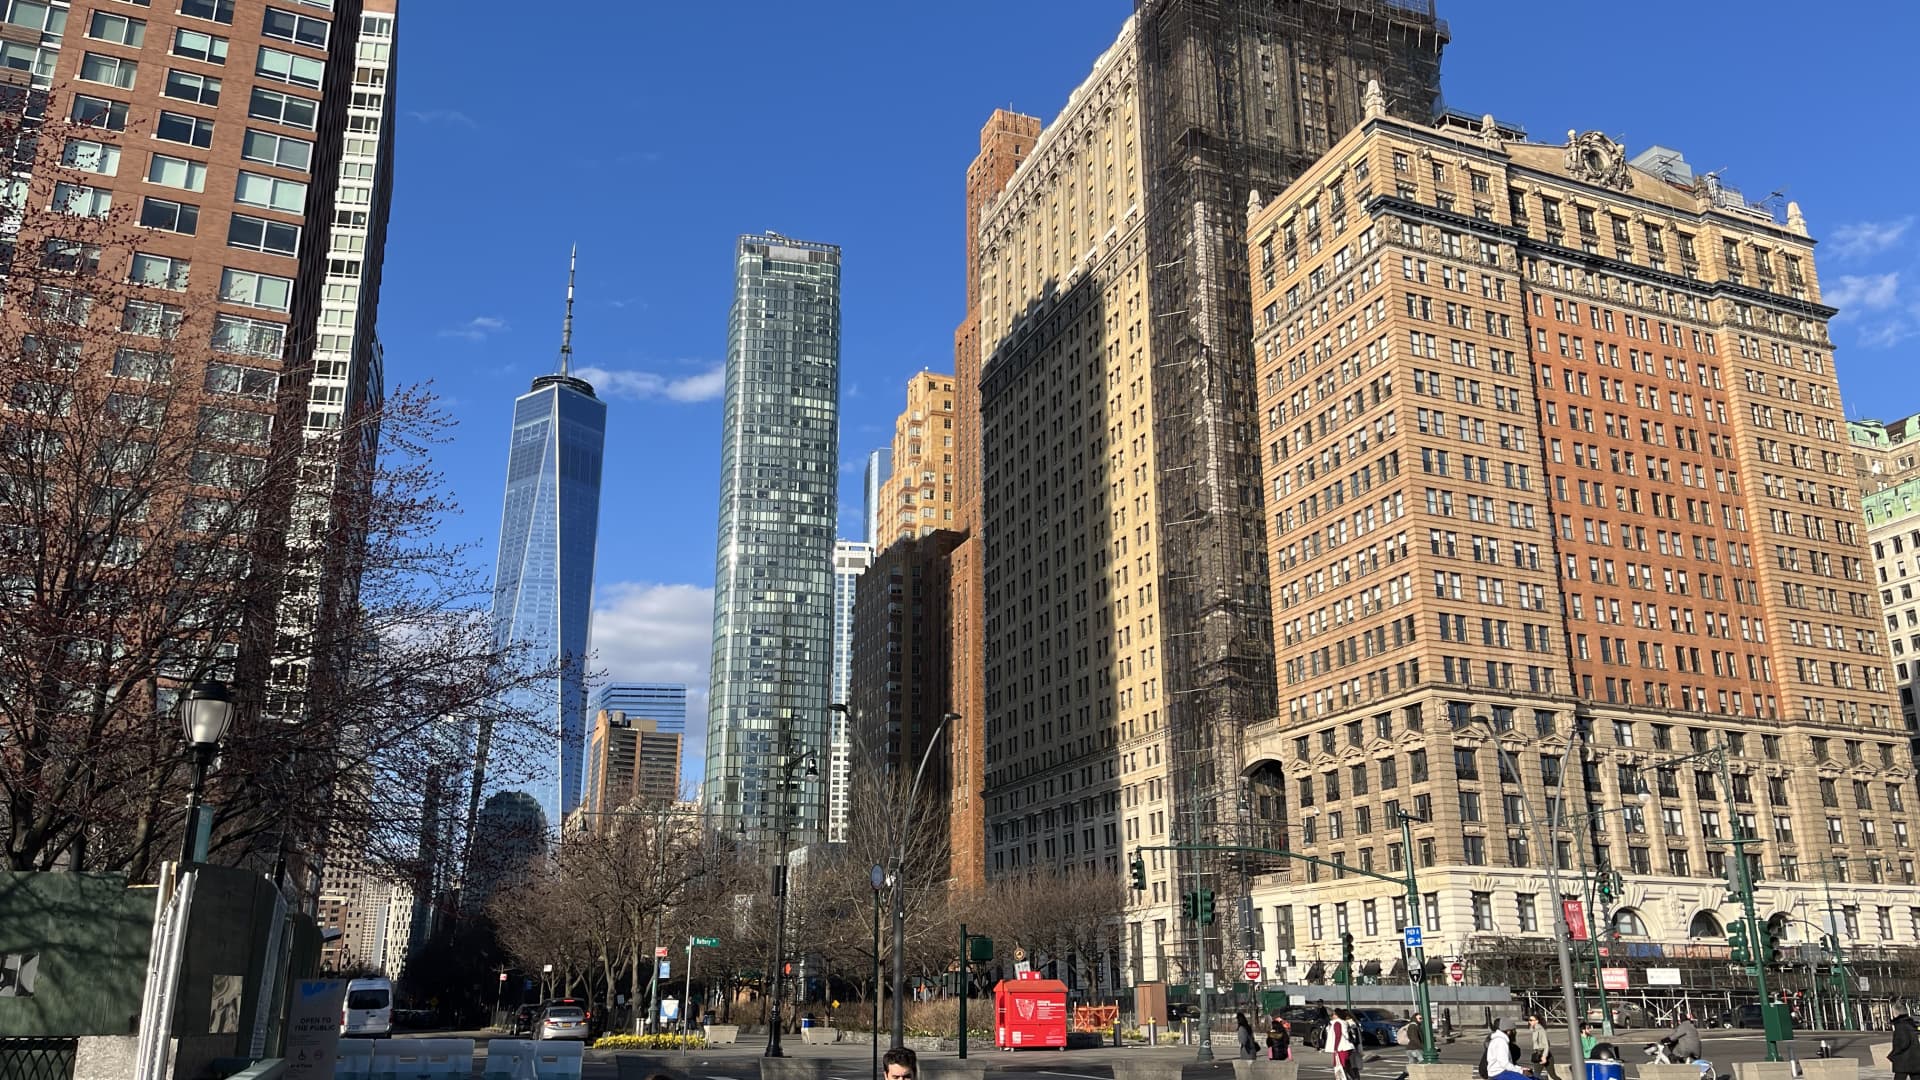 Battery Park City in Manhattan is a primarily residential neighborhood of upscale high-rise apartment buildings.